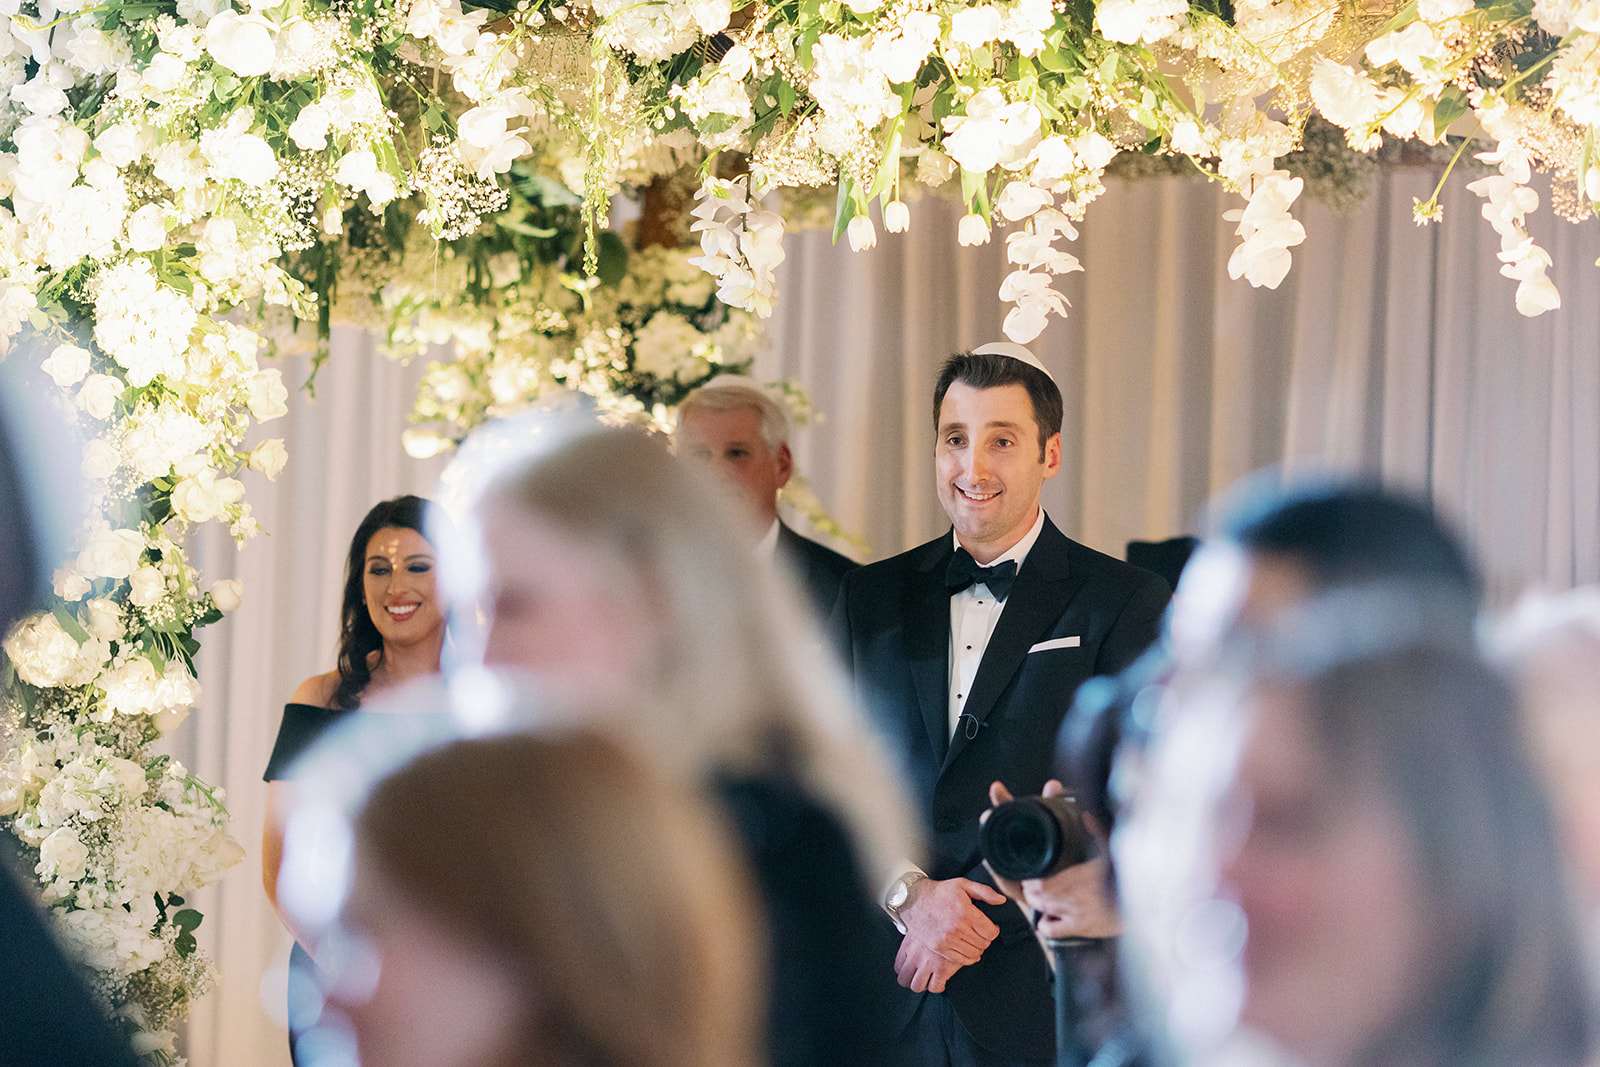 Groom smiling while watching his bride walk down the aisle.